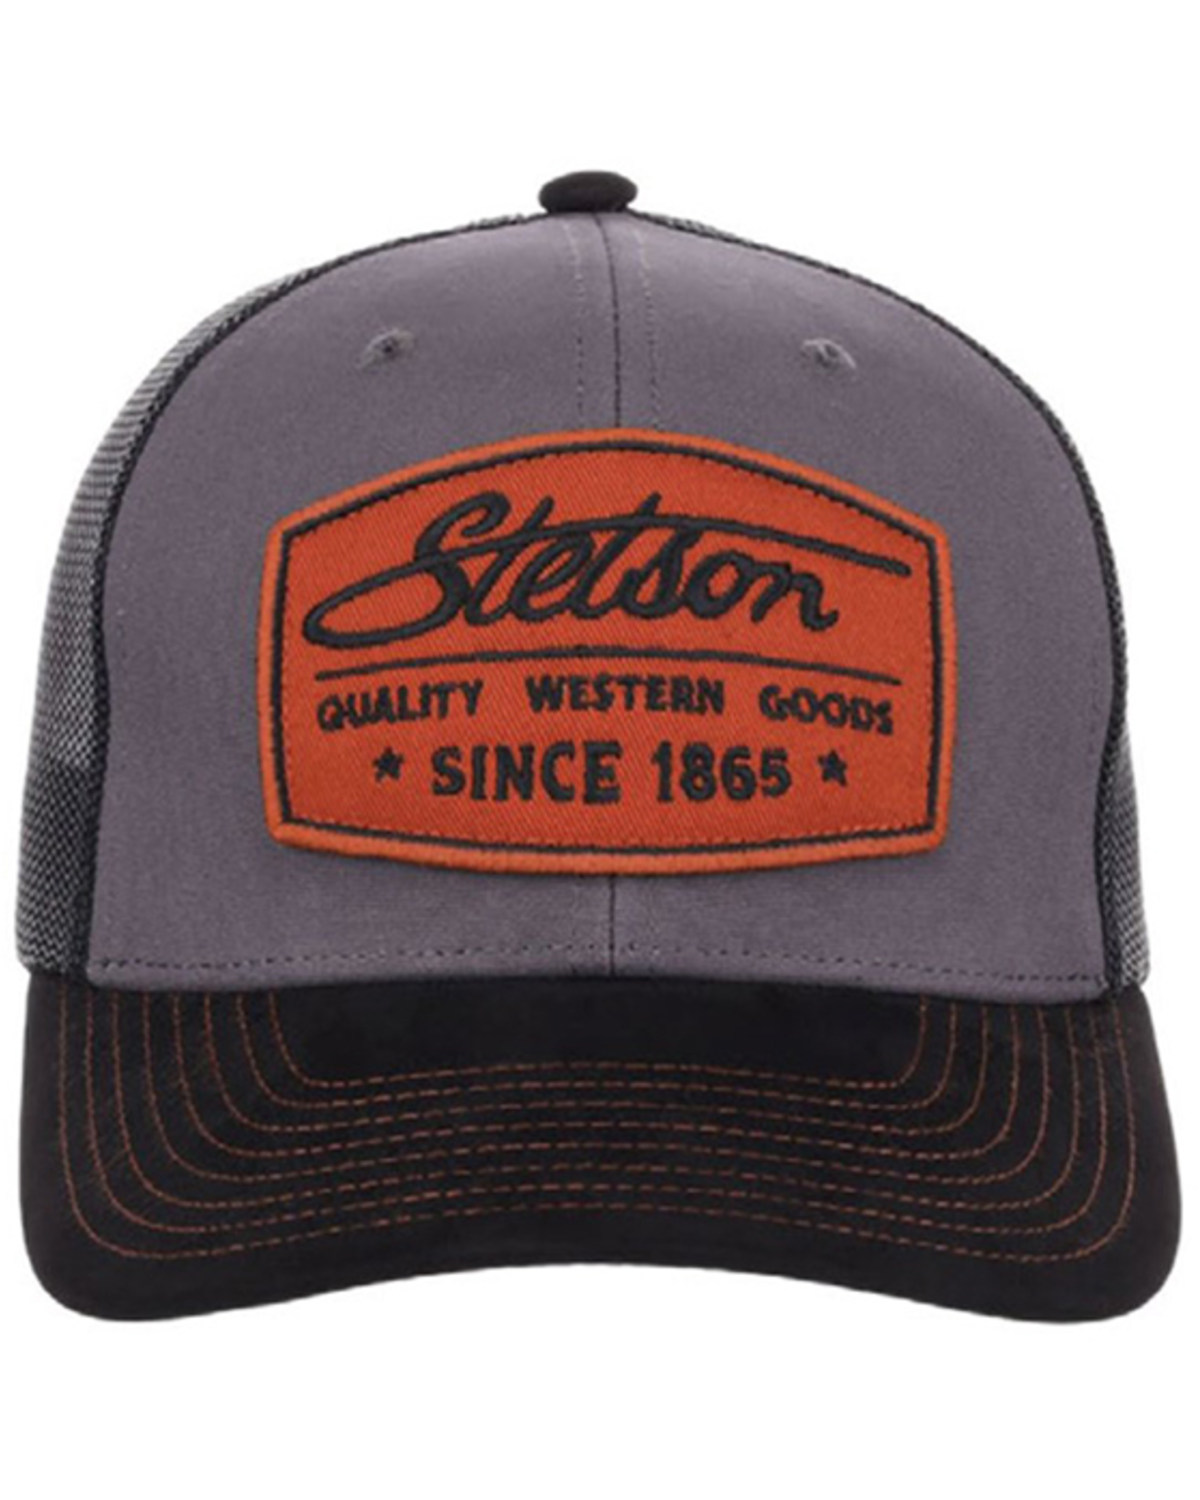 Stetson Men's Embroidered Twill Patch Suede Trucker Cap